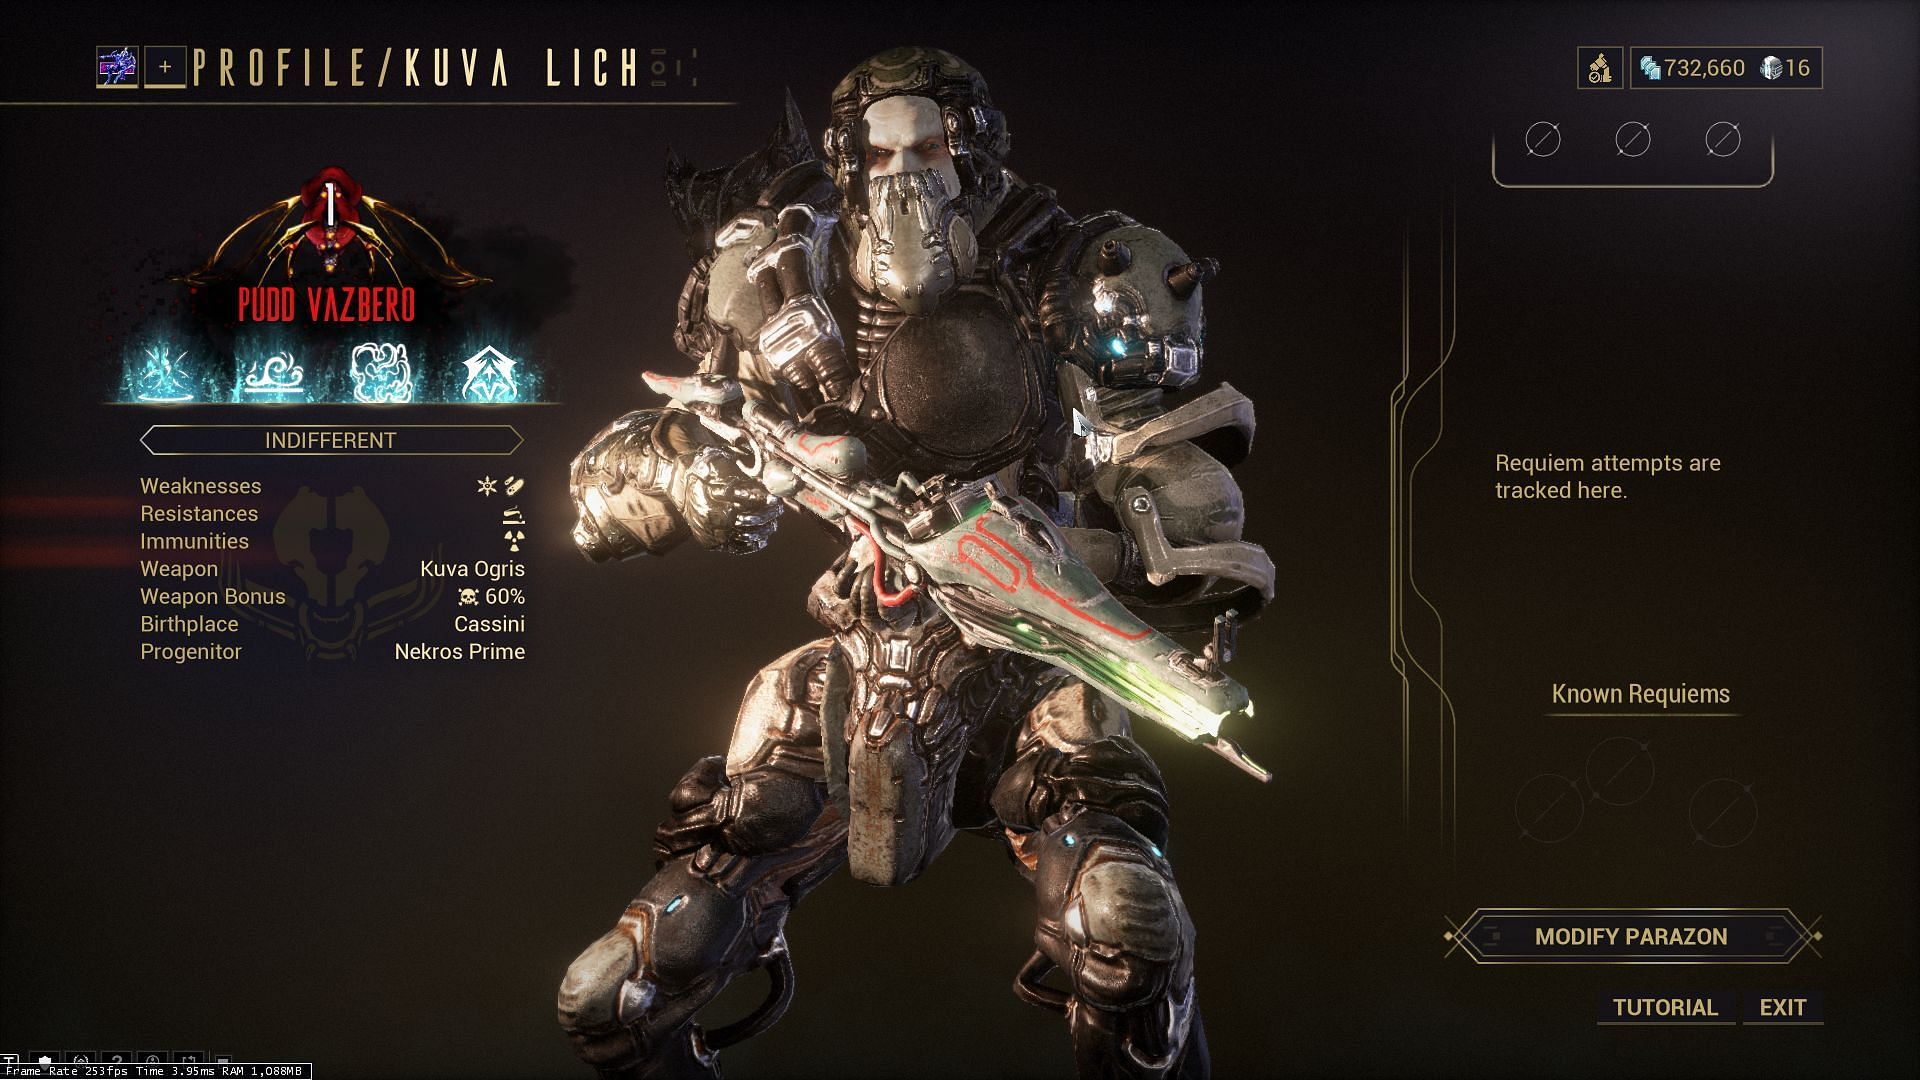 Kuva Ogris is arguably best area-of-effect weapon in the game for Sorties and other dailies (Image via Digital Extremes)